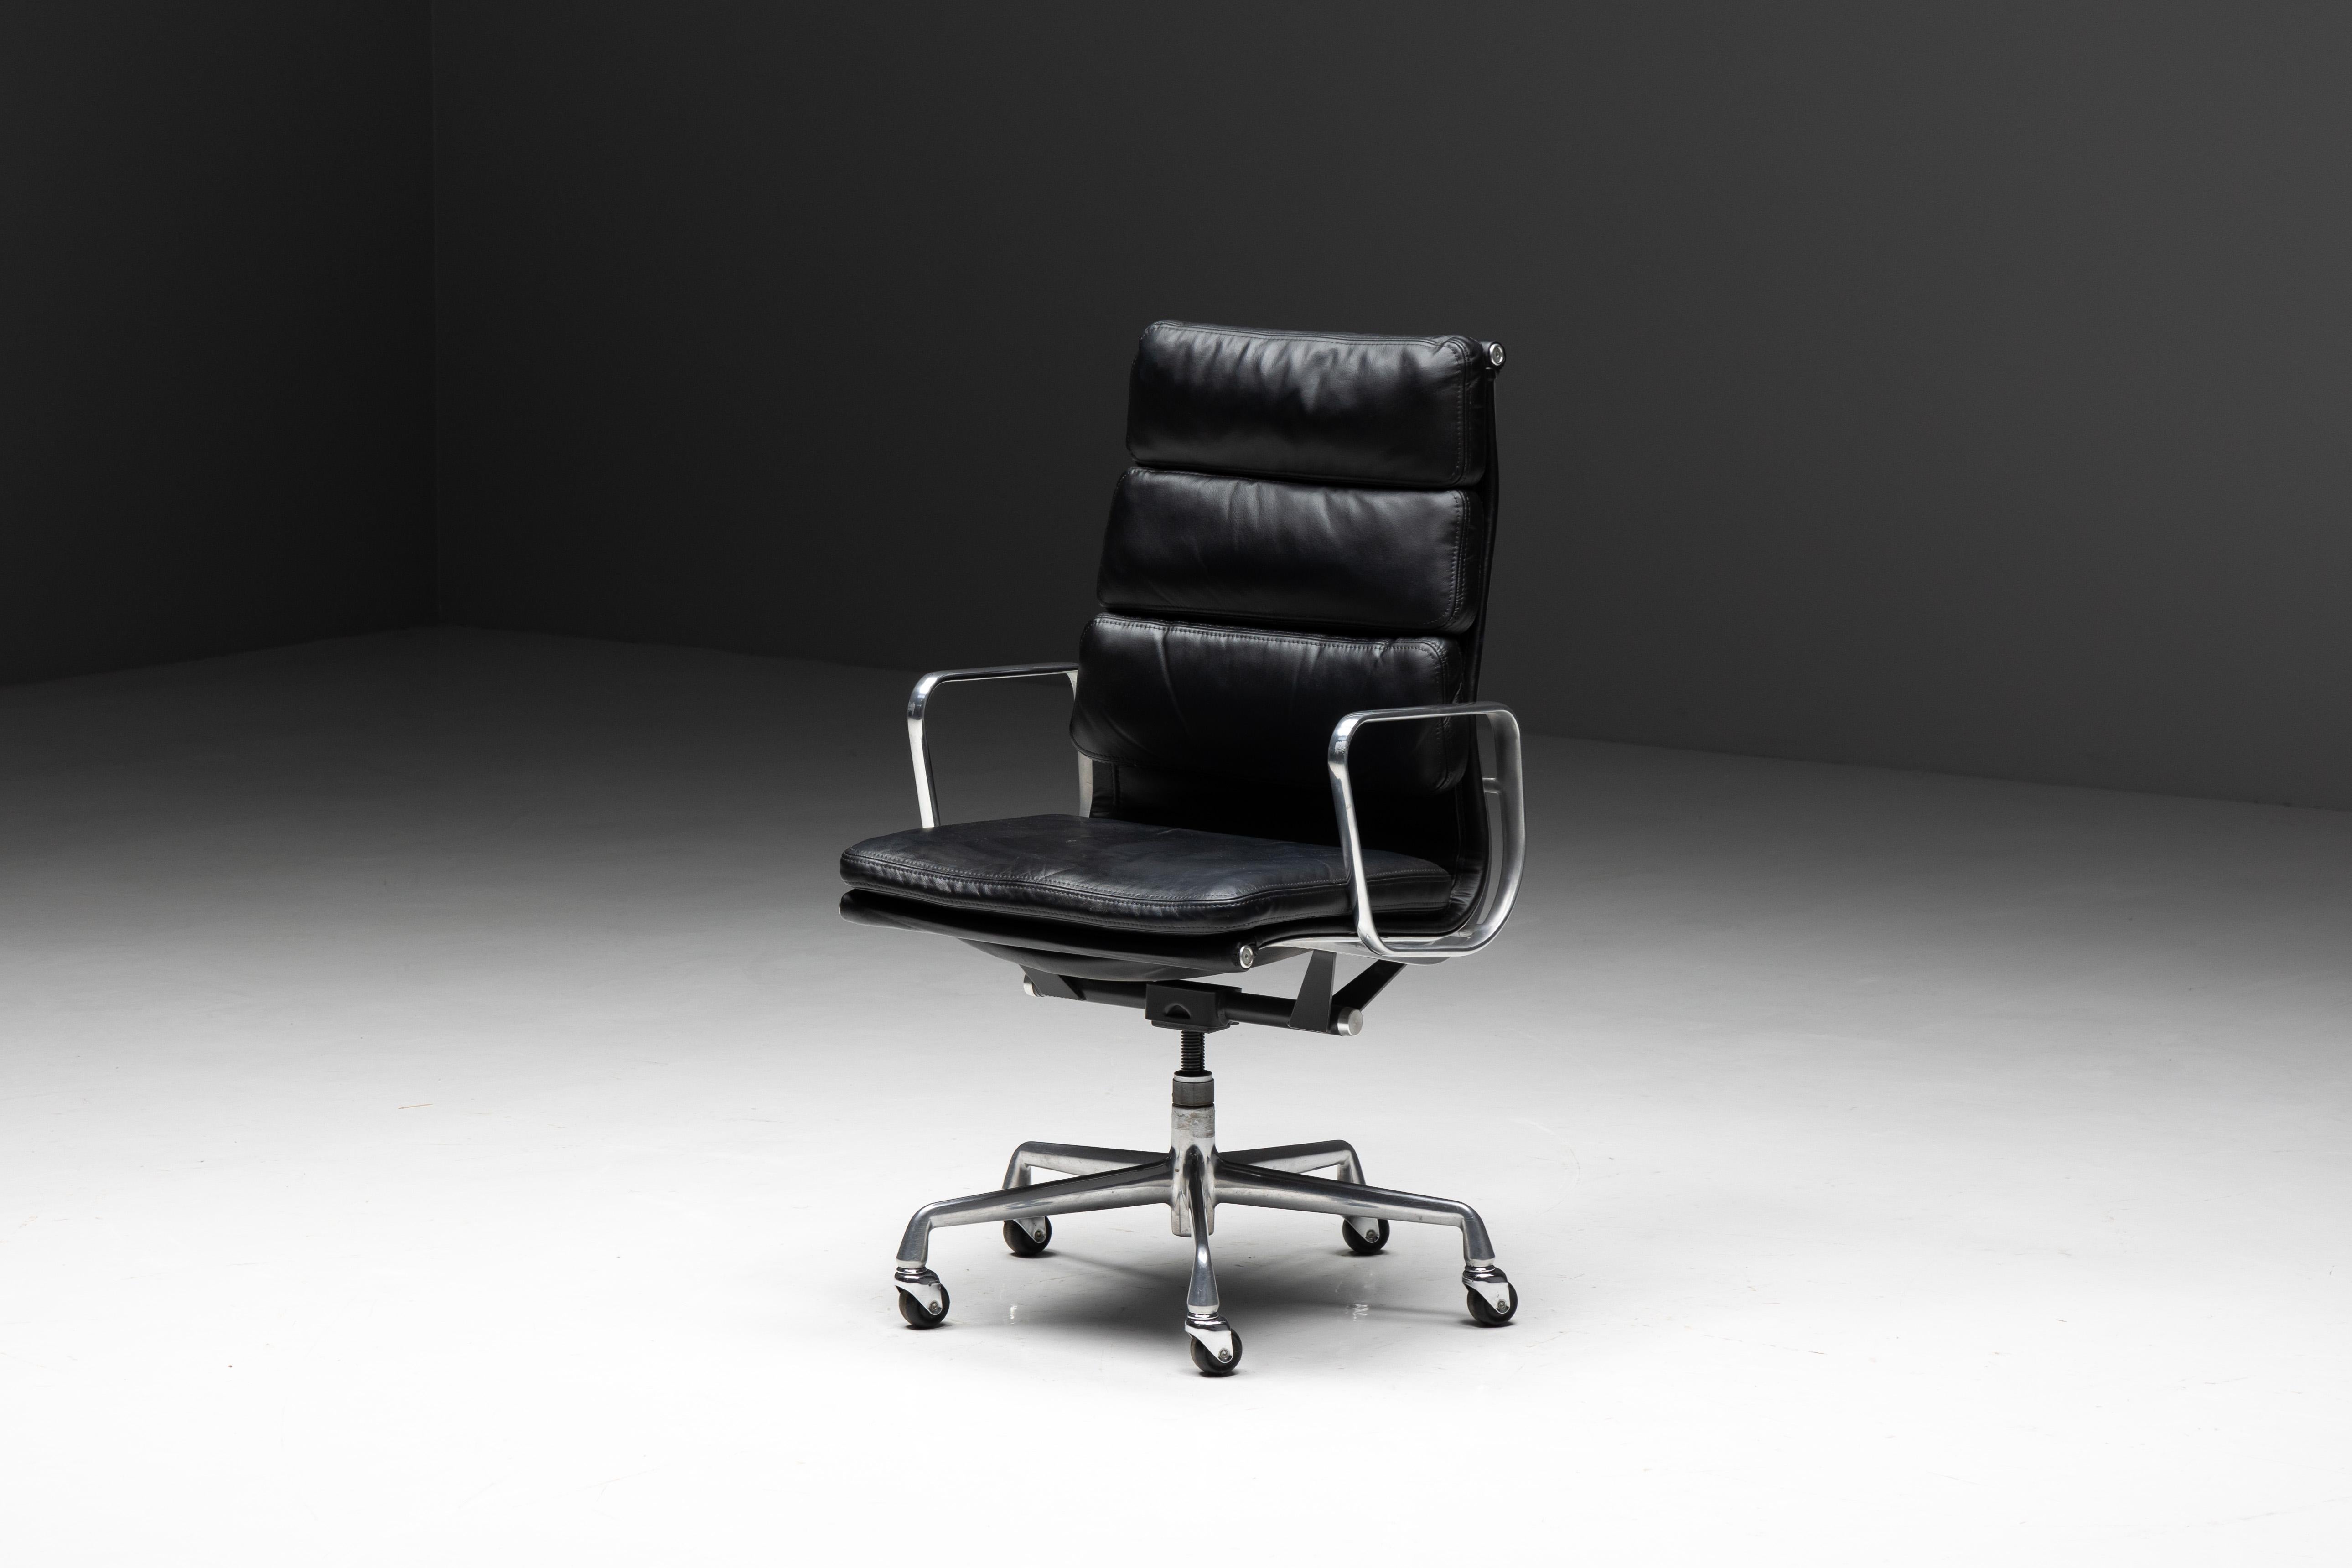 Charles and Ray Eames softpad office chair, produced by Herman Miller. This distinguished chair, crafted as the original USA edition for Herman Miller, features a sleek black leather seat and backrest, complemented by a chrome frame and armrests. An